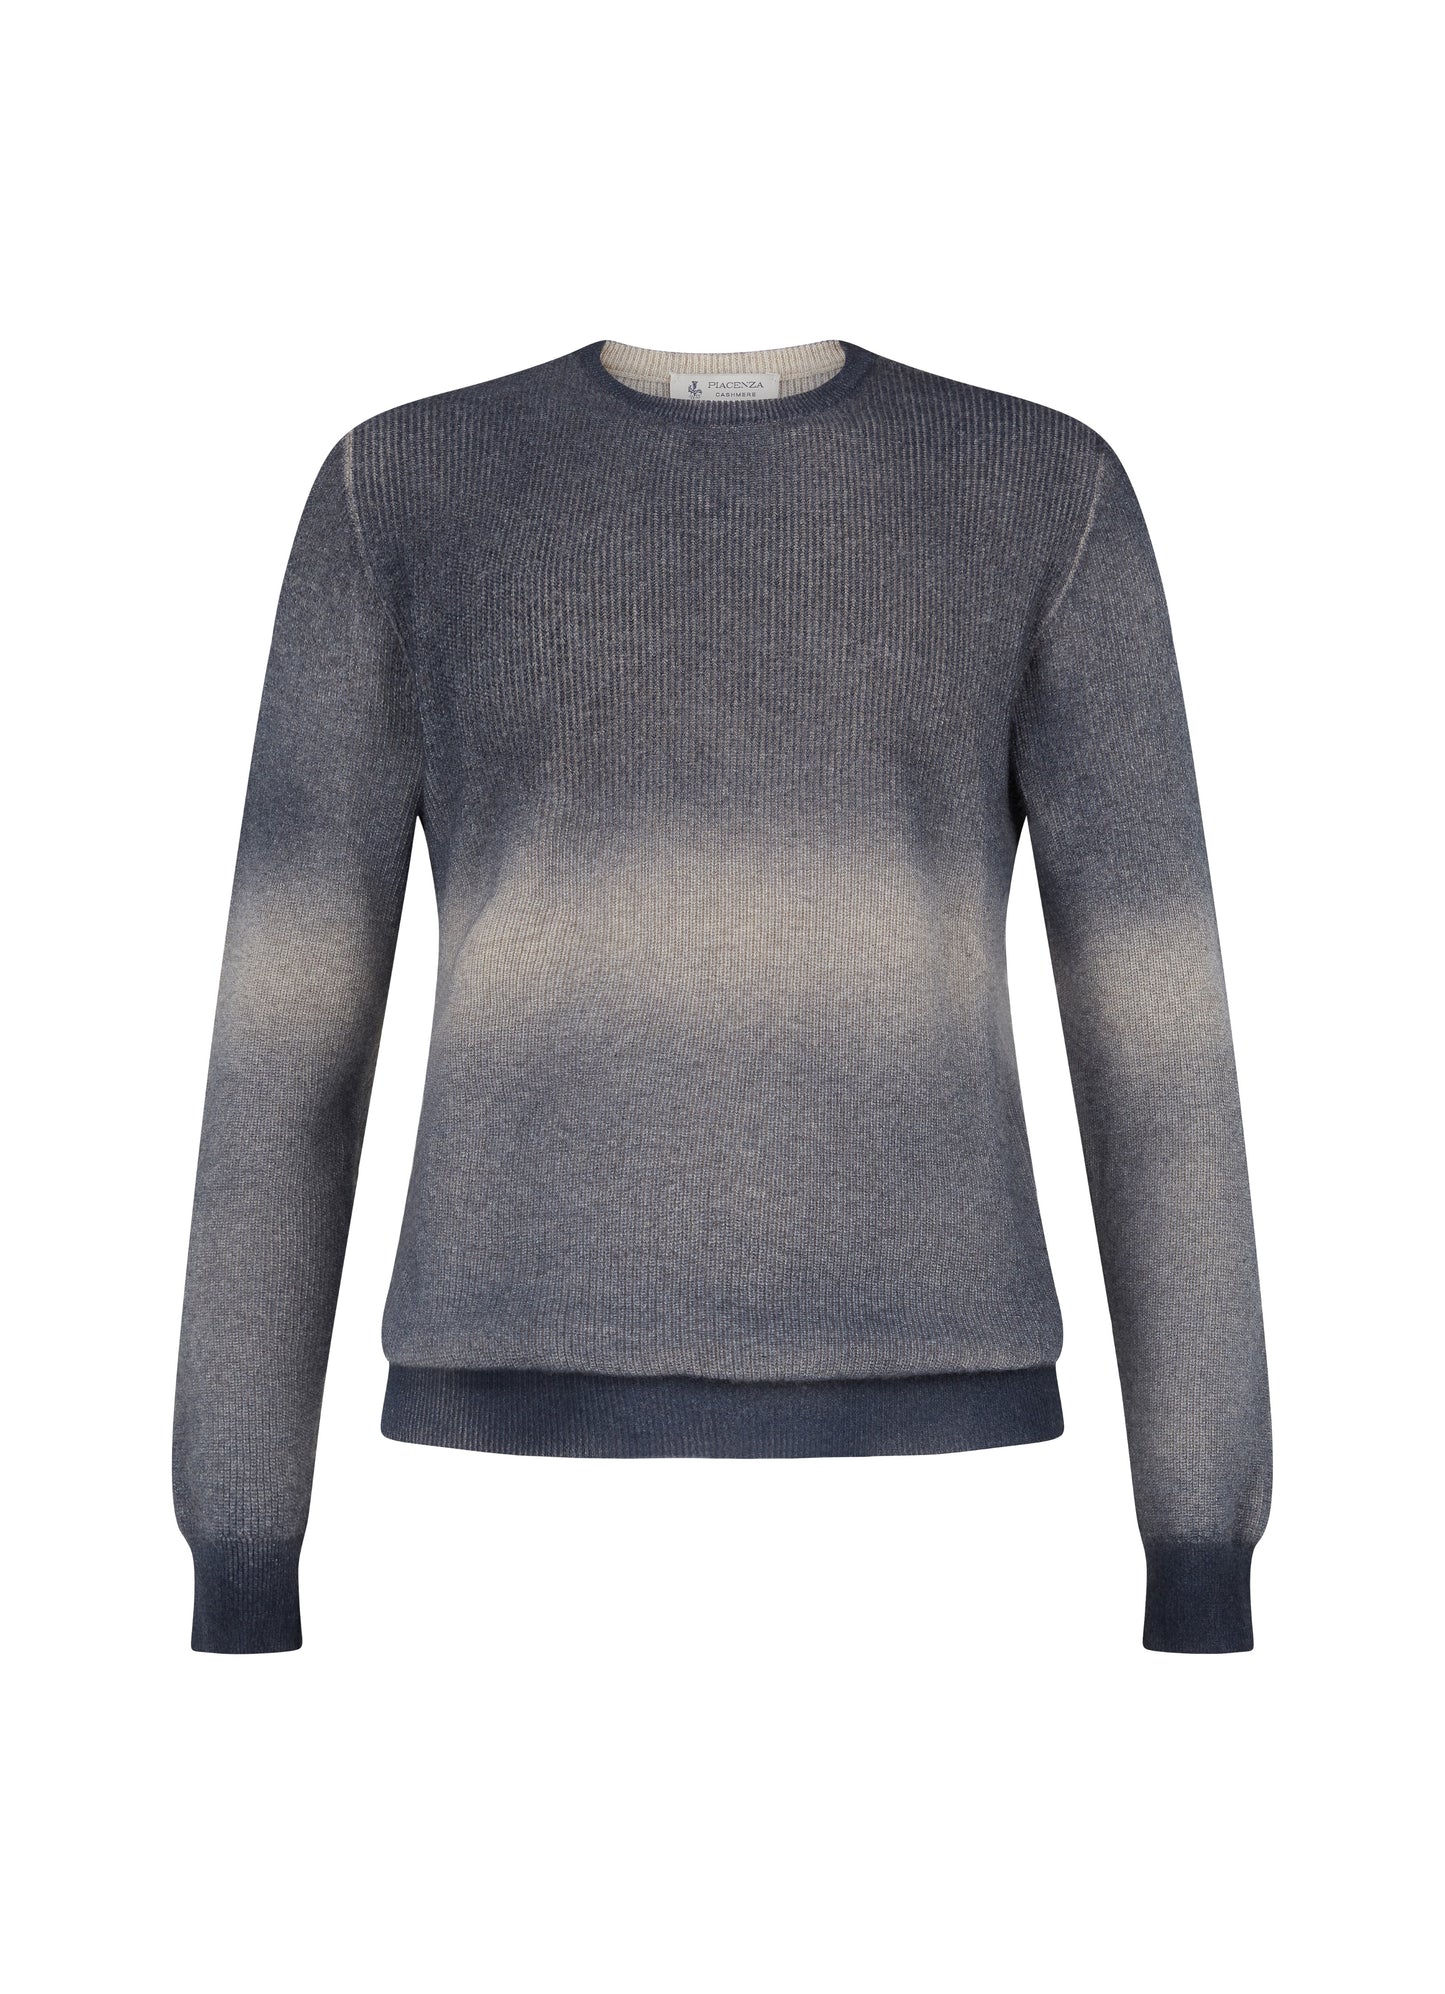 Blue cob point airbrushed crewneck